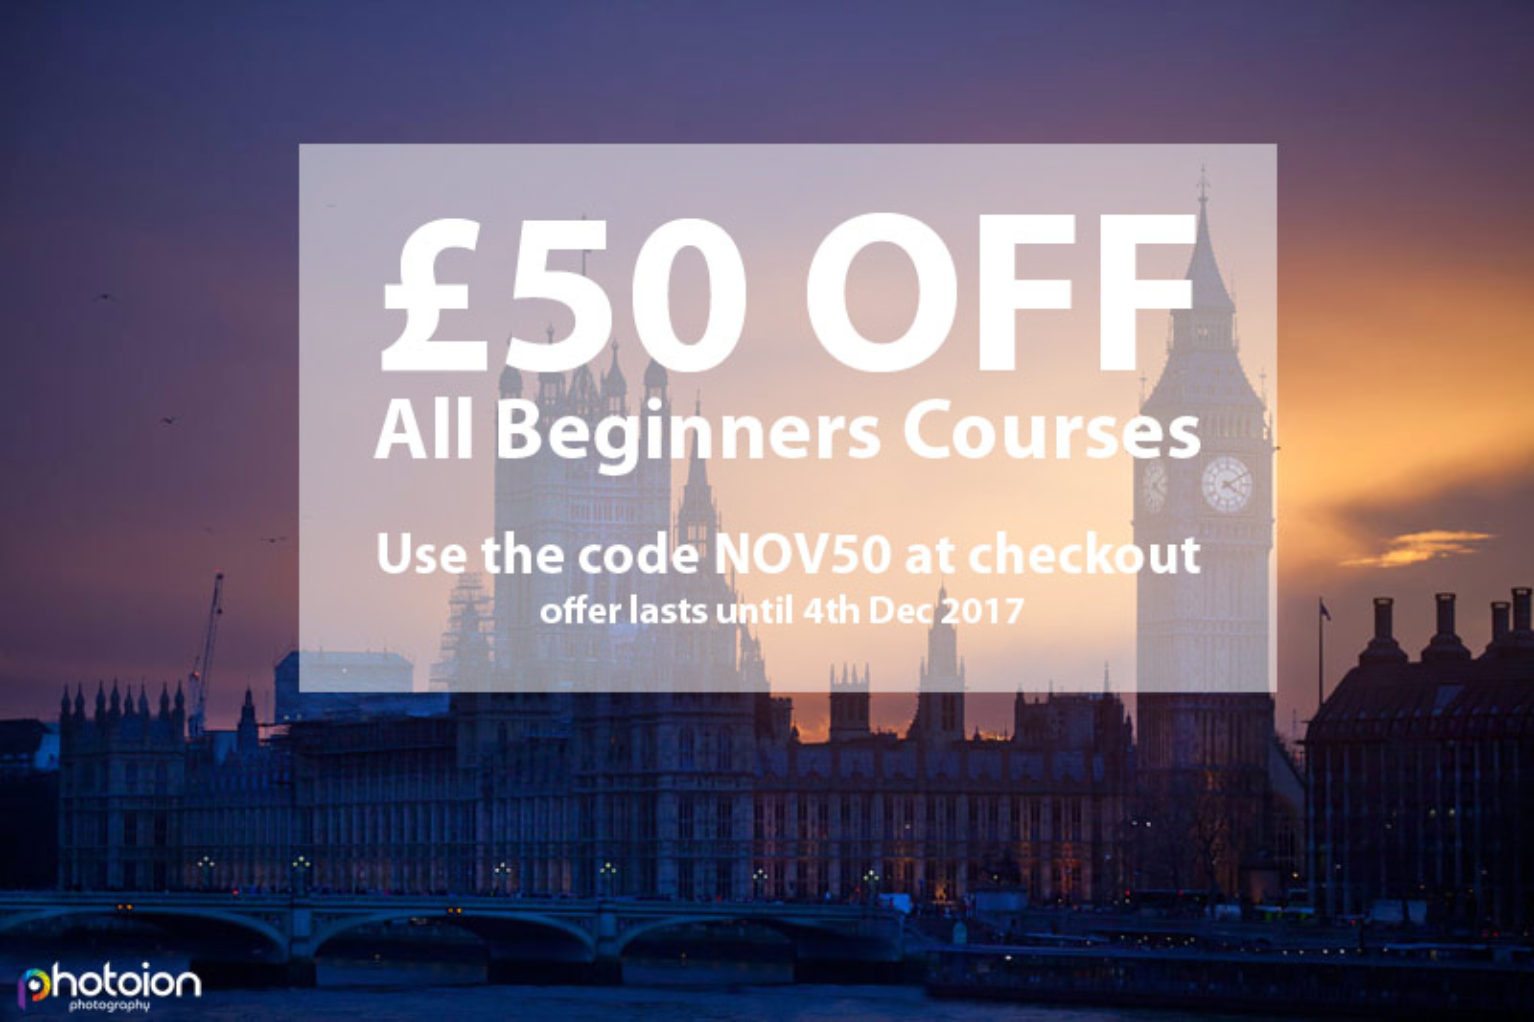 Special Offer on our Beginners Photography Course